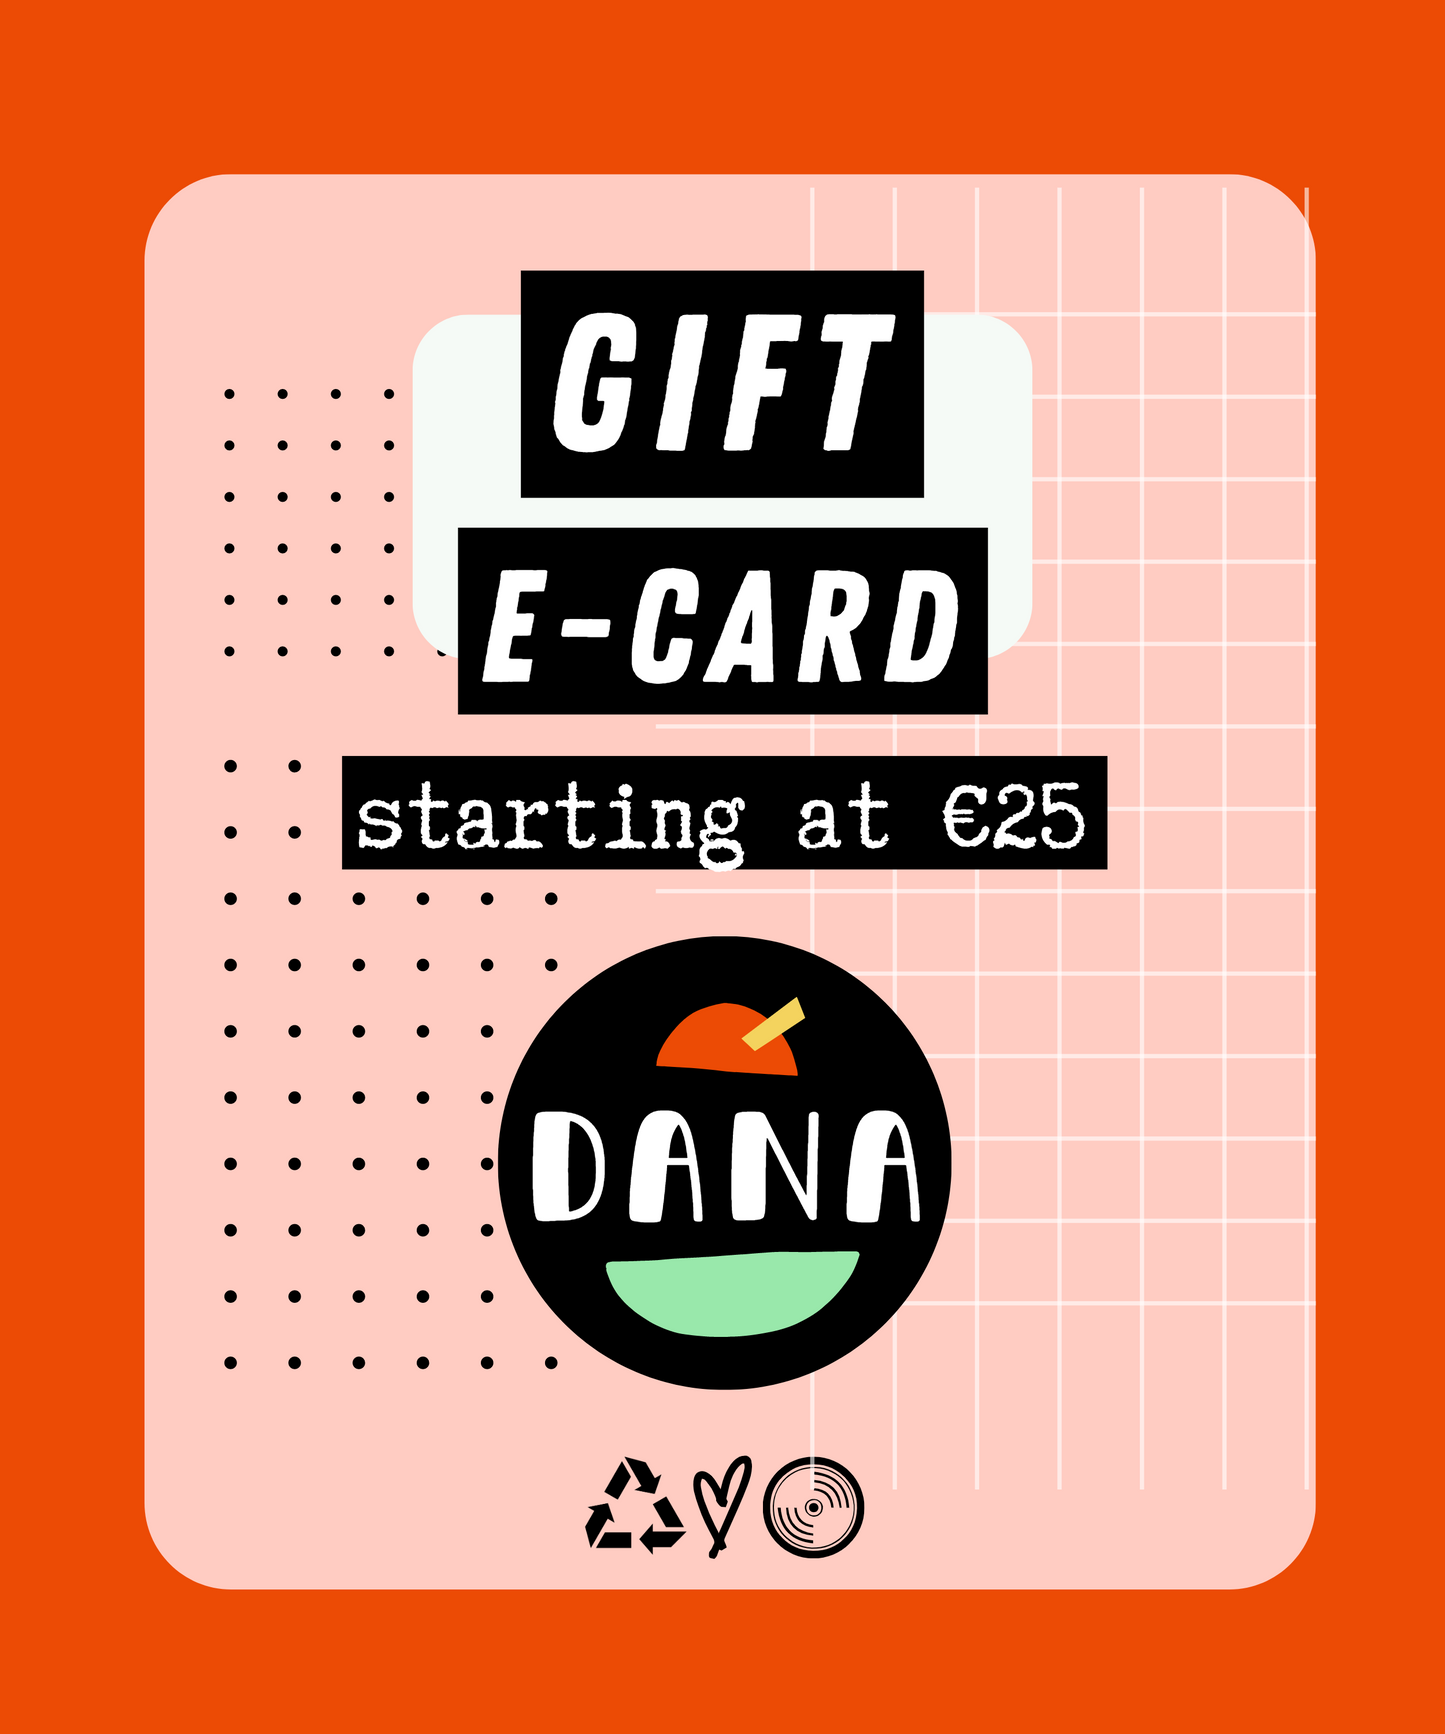 GIFT e-cards / starting at 25.00